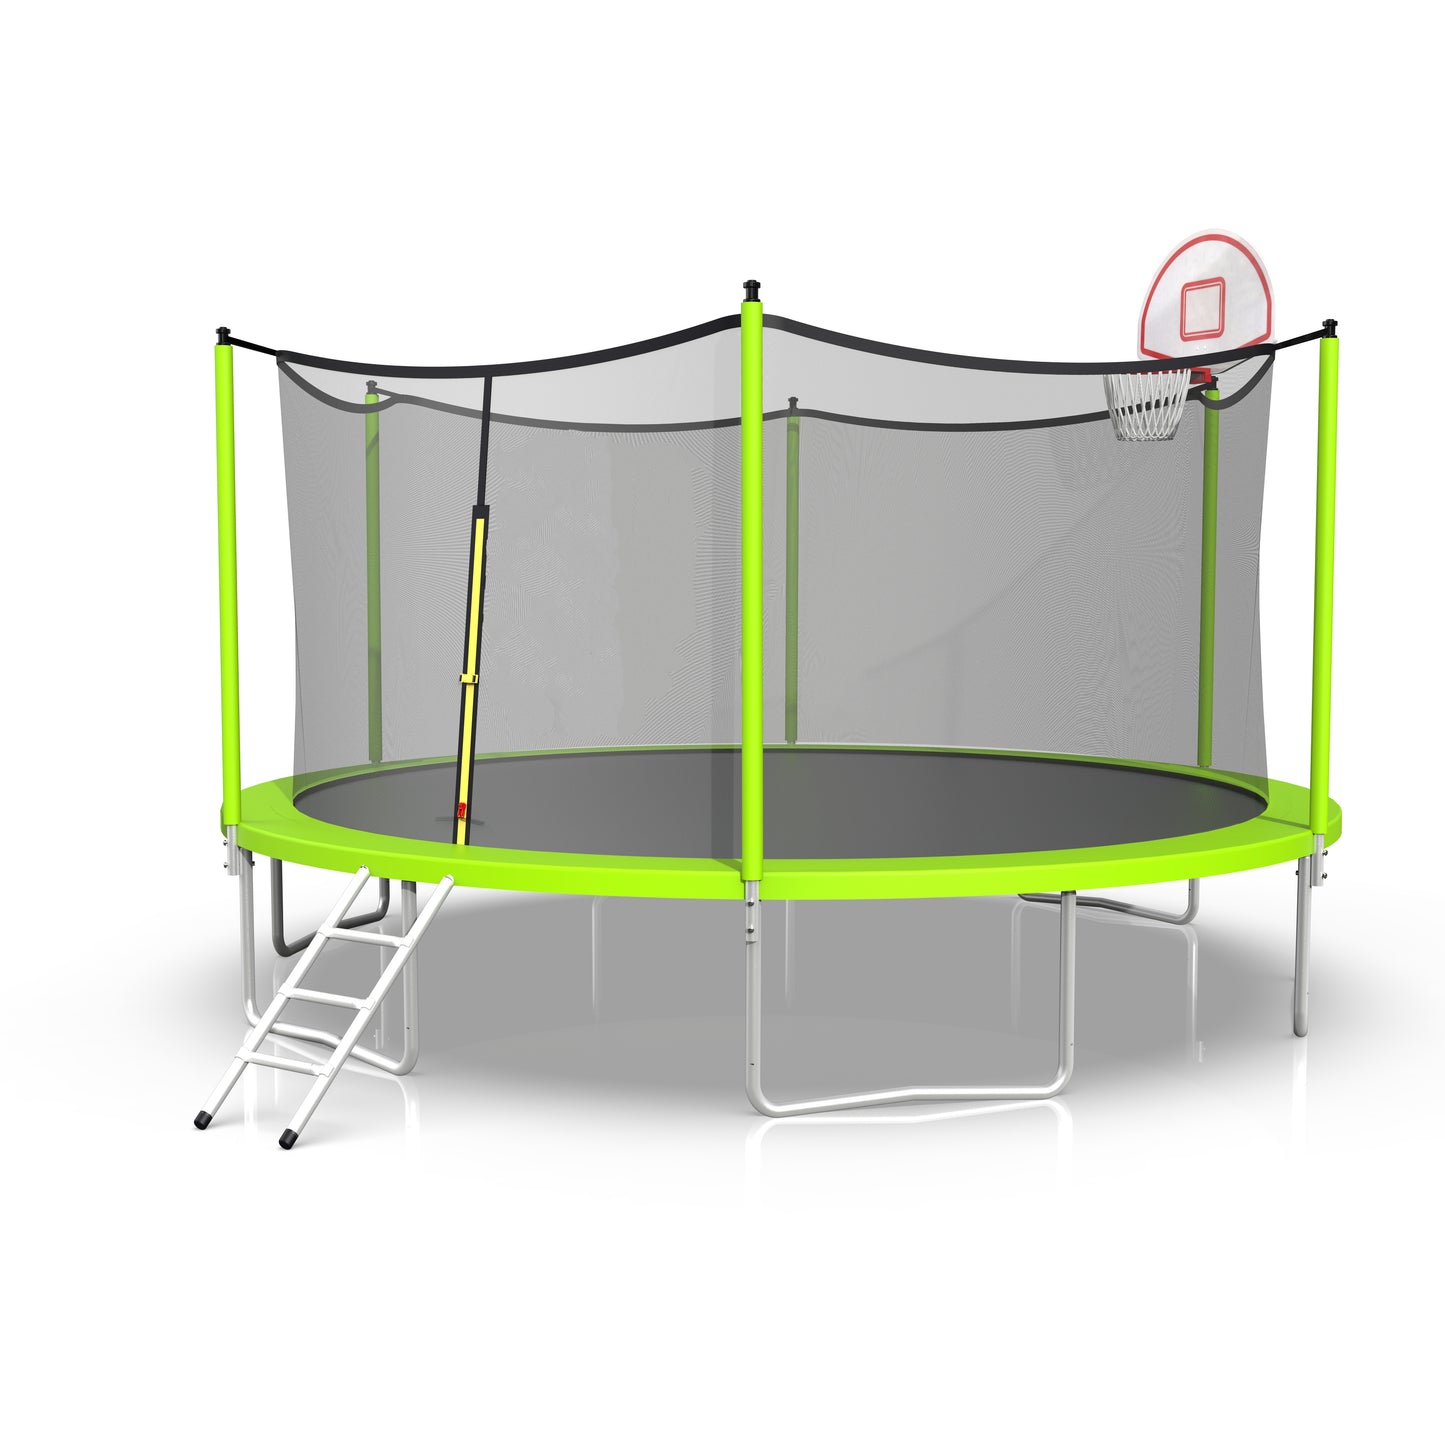 16ft Trampoline with Enclosure, New Upgraded Kids Outdoor Trampoline with Basketball Hoop and Ladder, Heavy-Duty Round Trampoline，Green